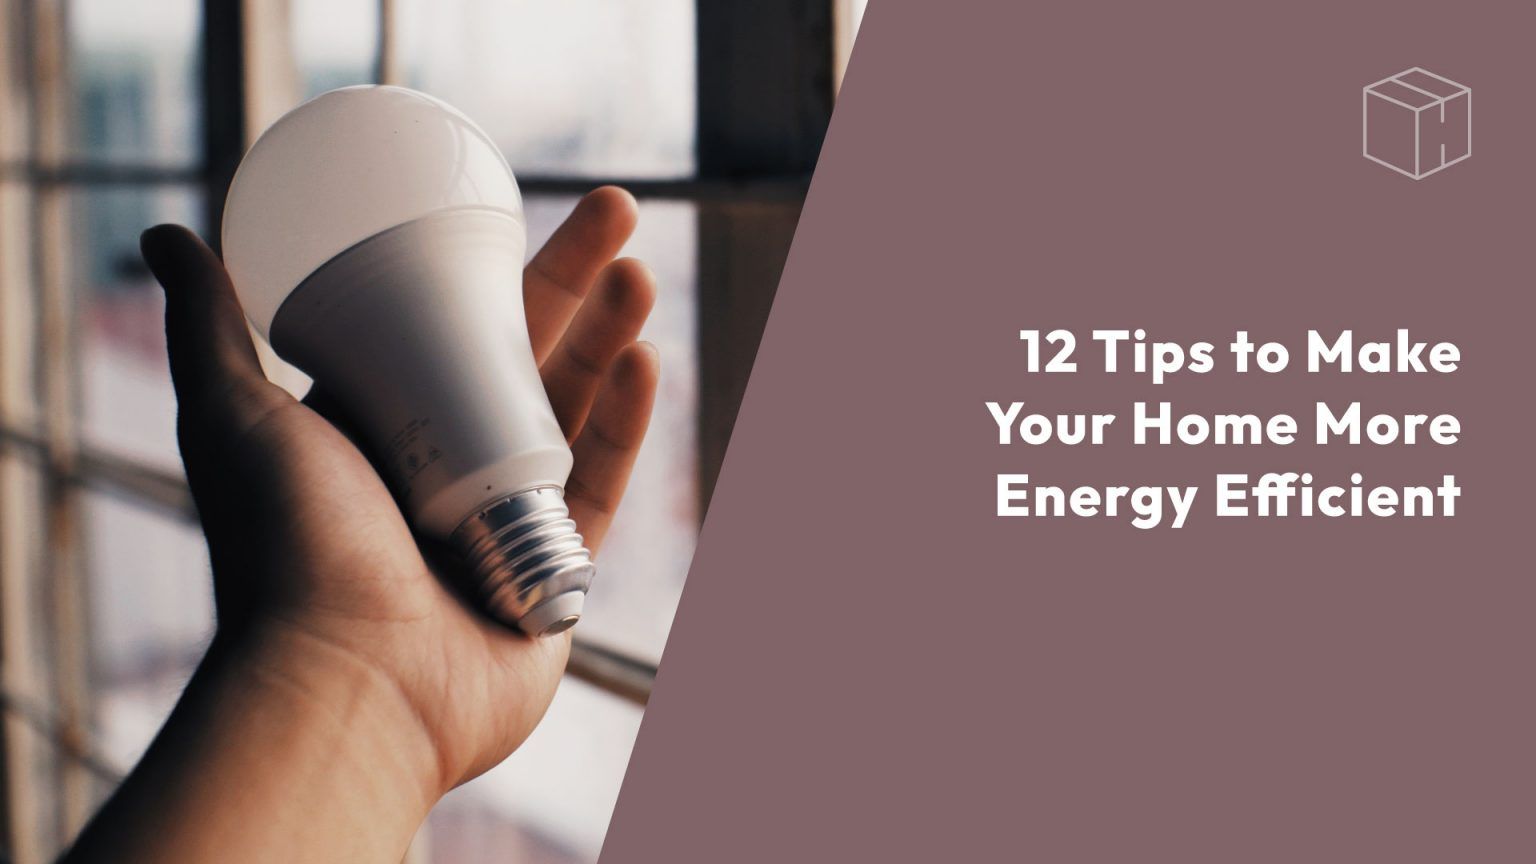 12 Tips to Make Your Home More Energy Efficient